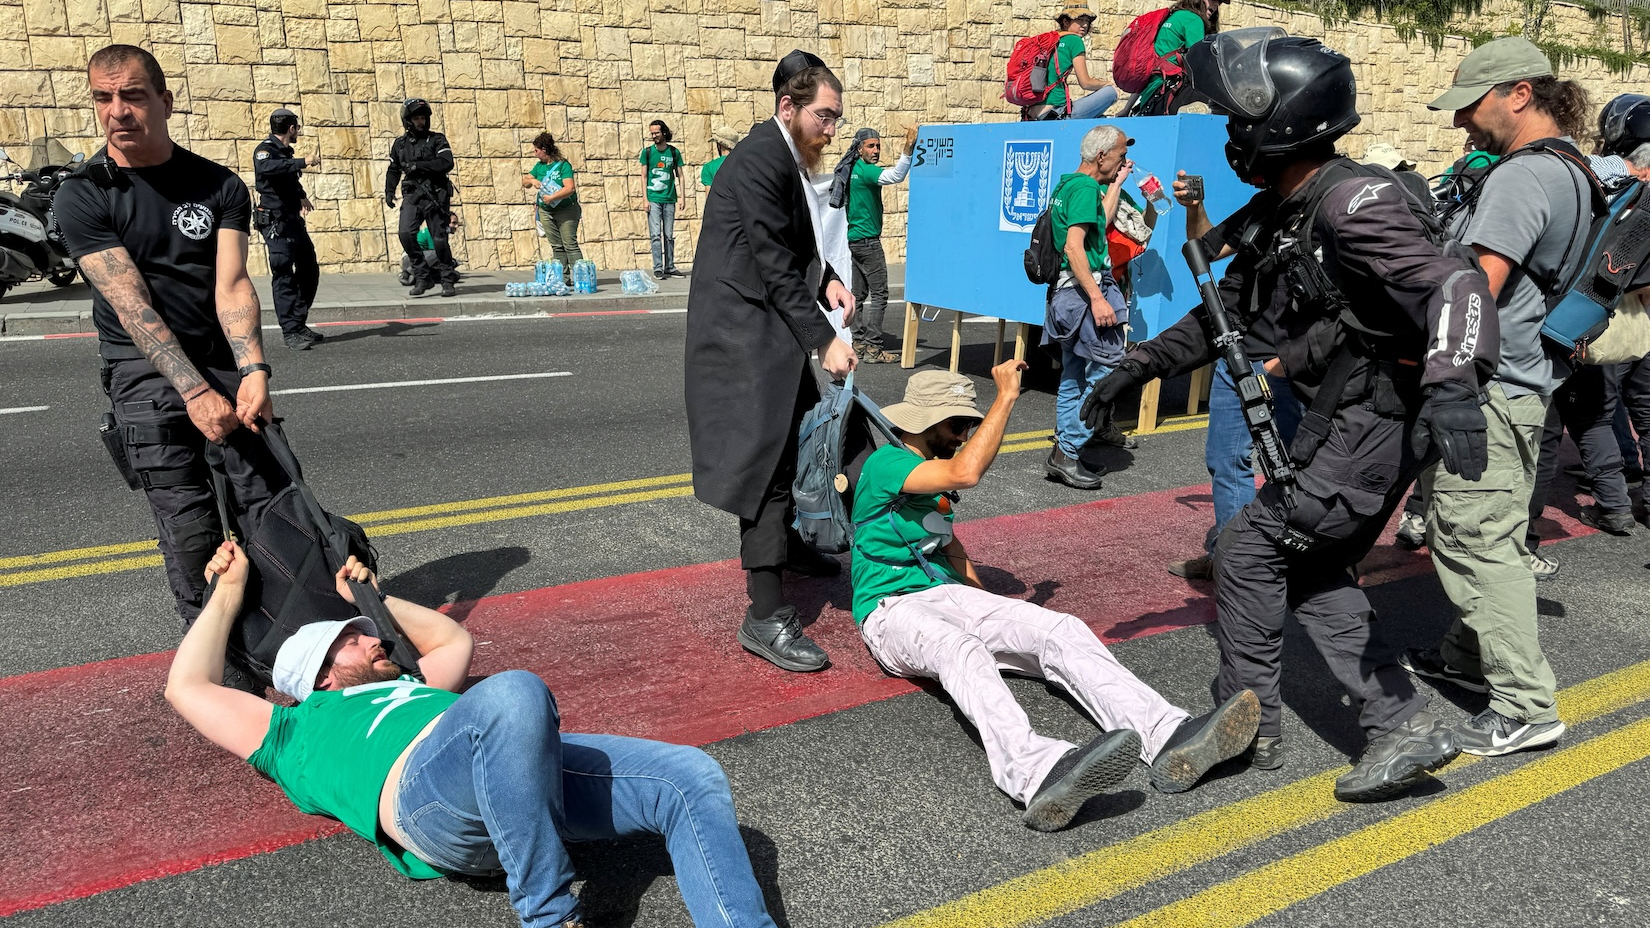 Protestors being tackled as they erect a ballot box at the entrance to Jerusalem. /Ilan Rosenberg/Reuters